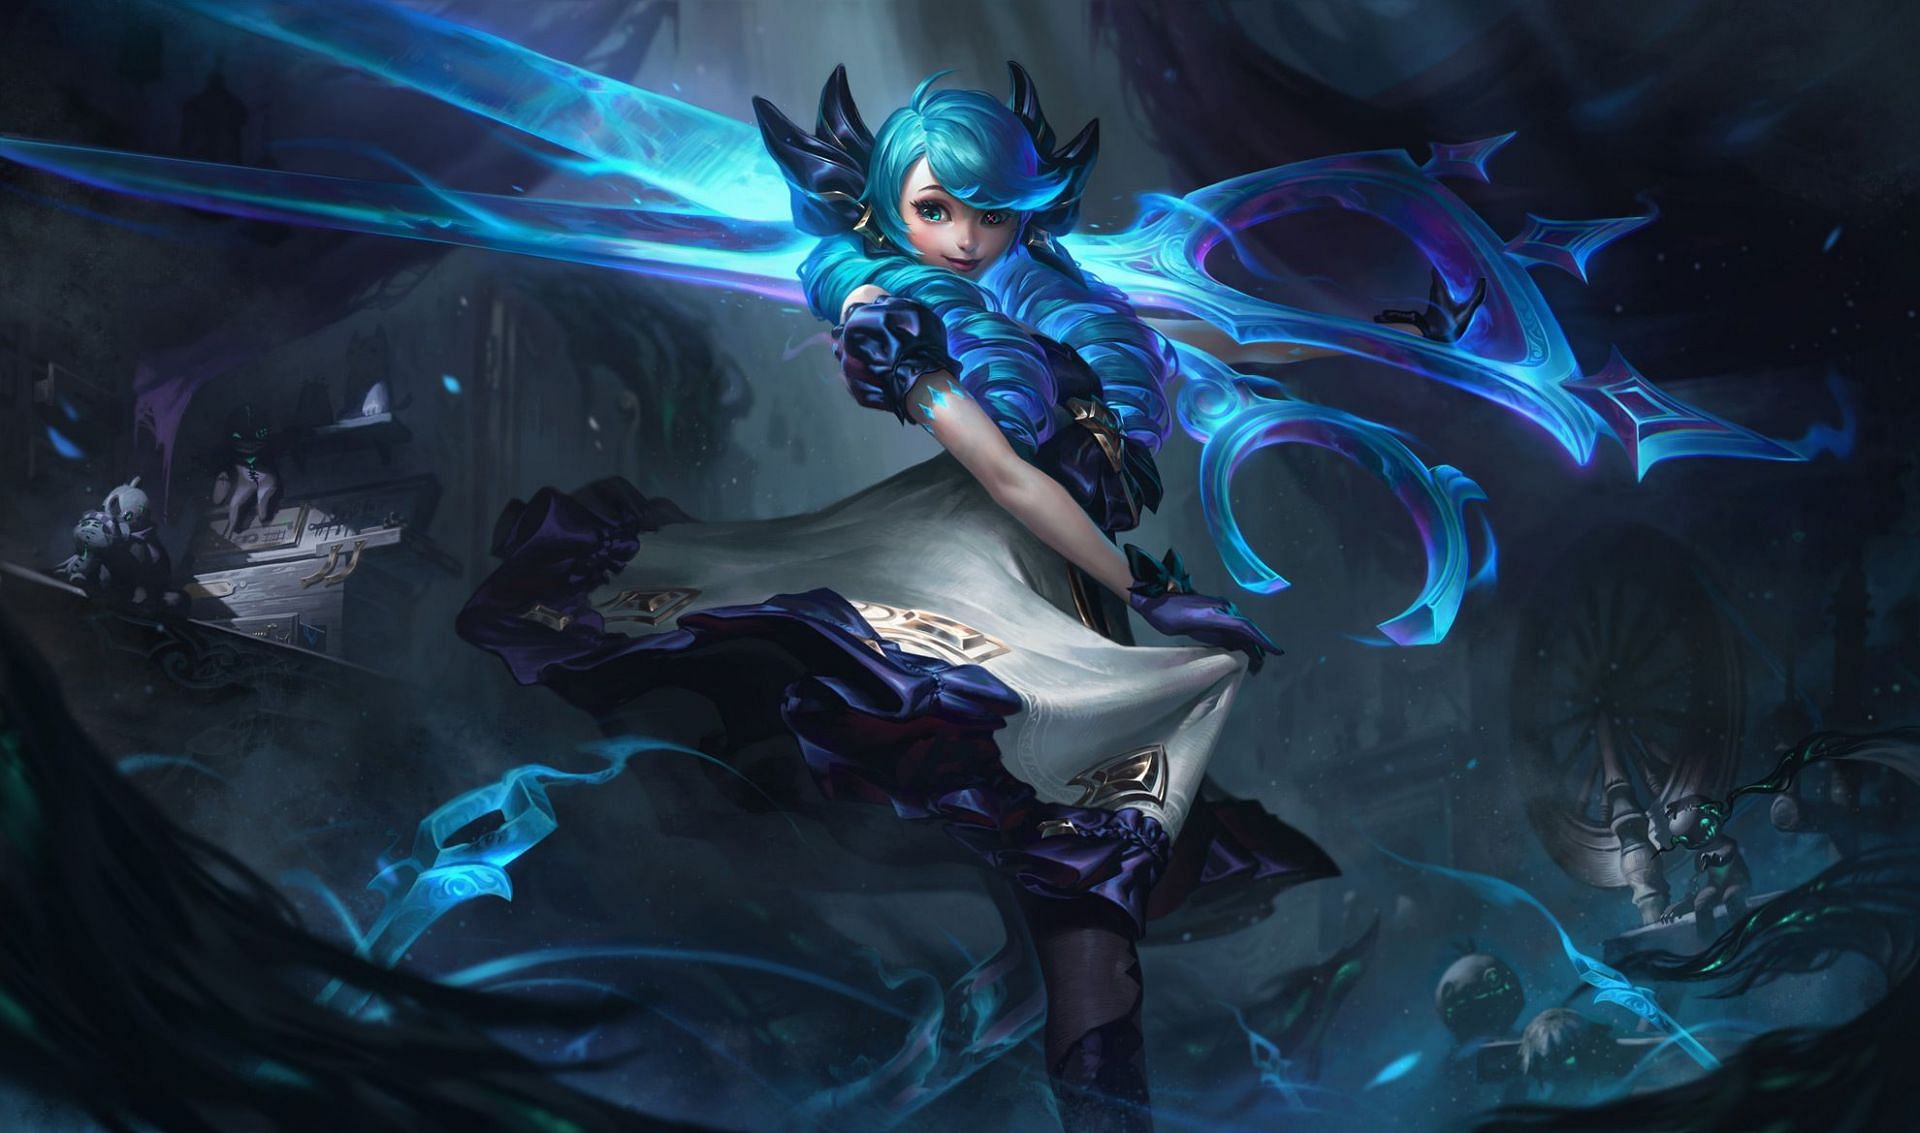 LoL 13.18 Patch Notes: Champions Buffs, Nerfs, Briar Release